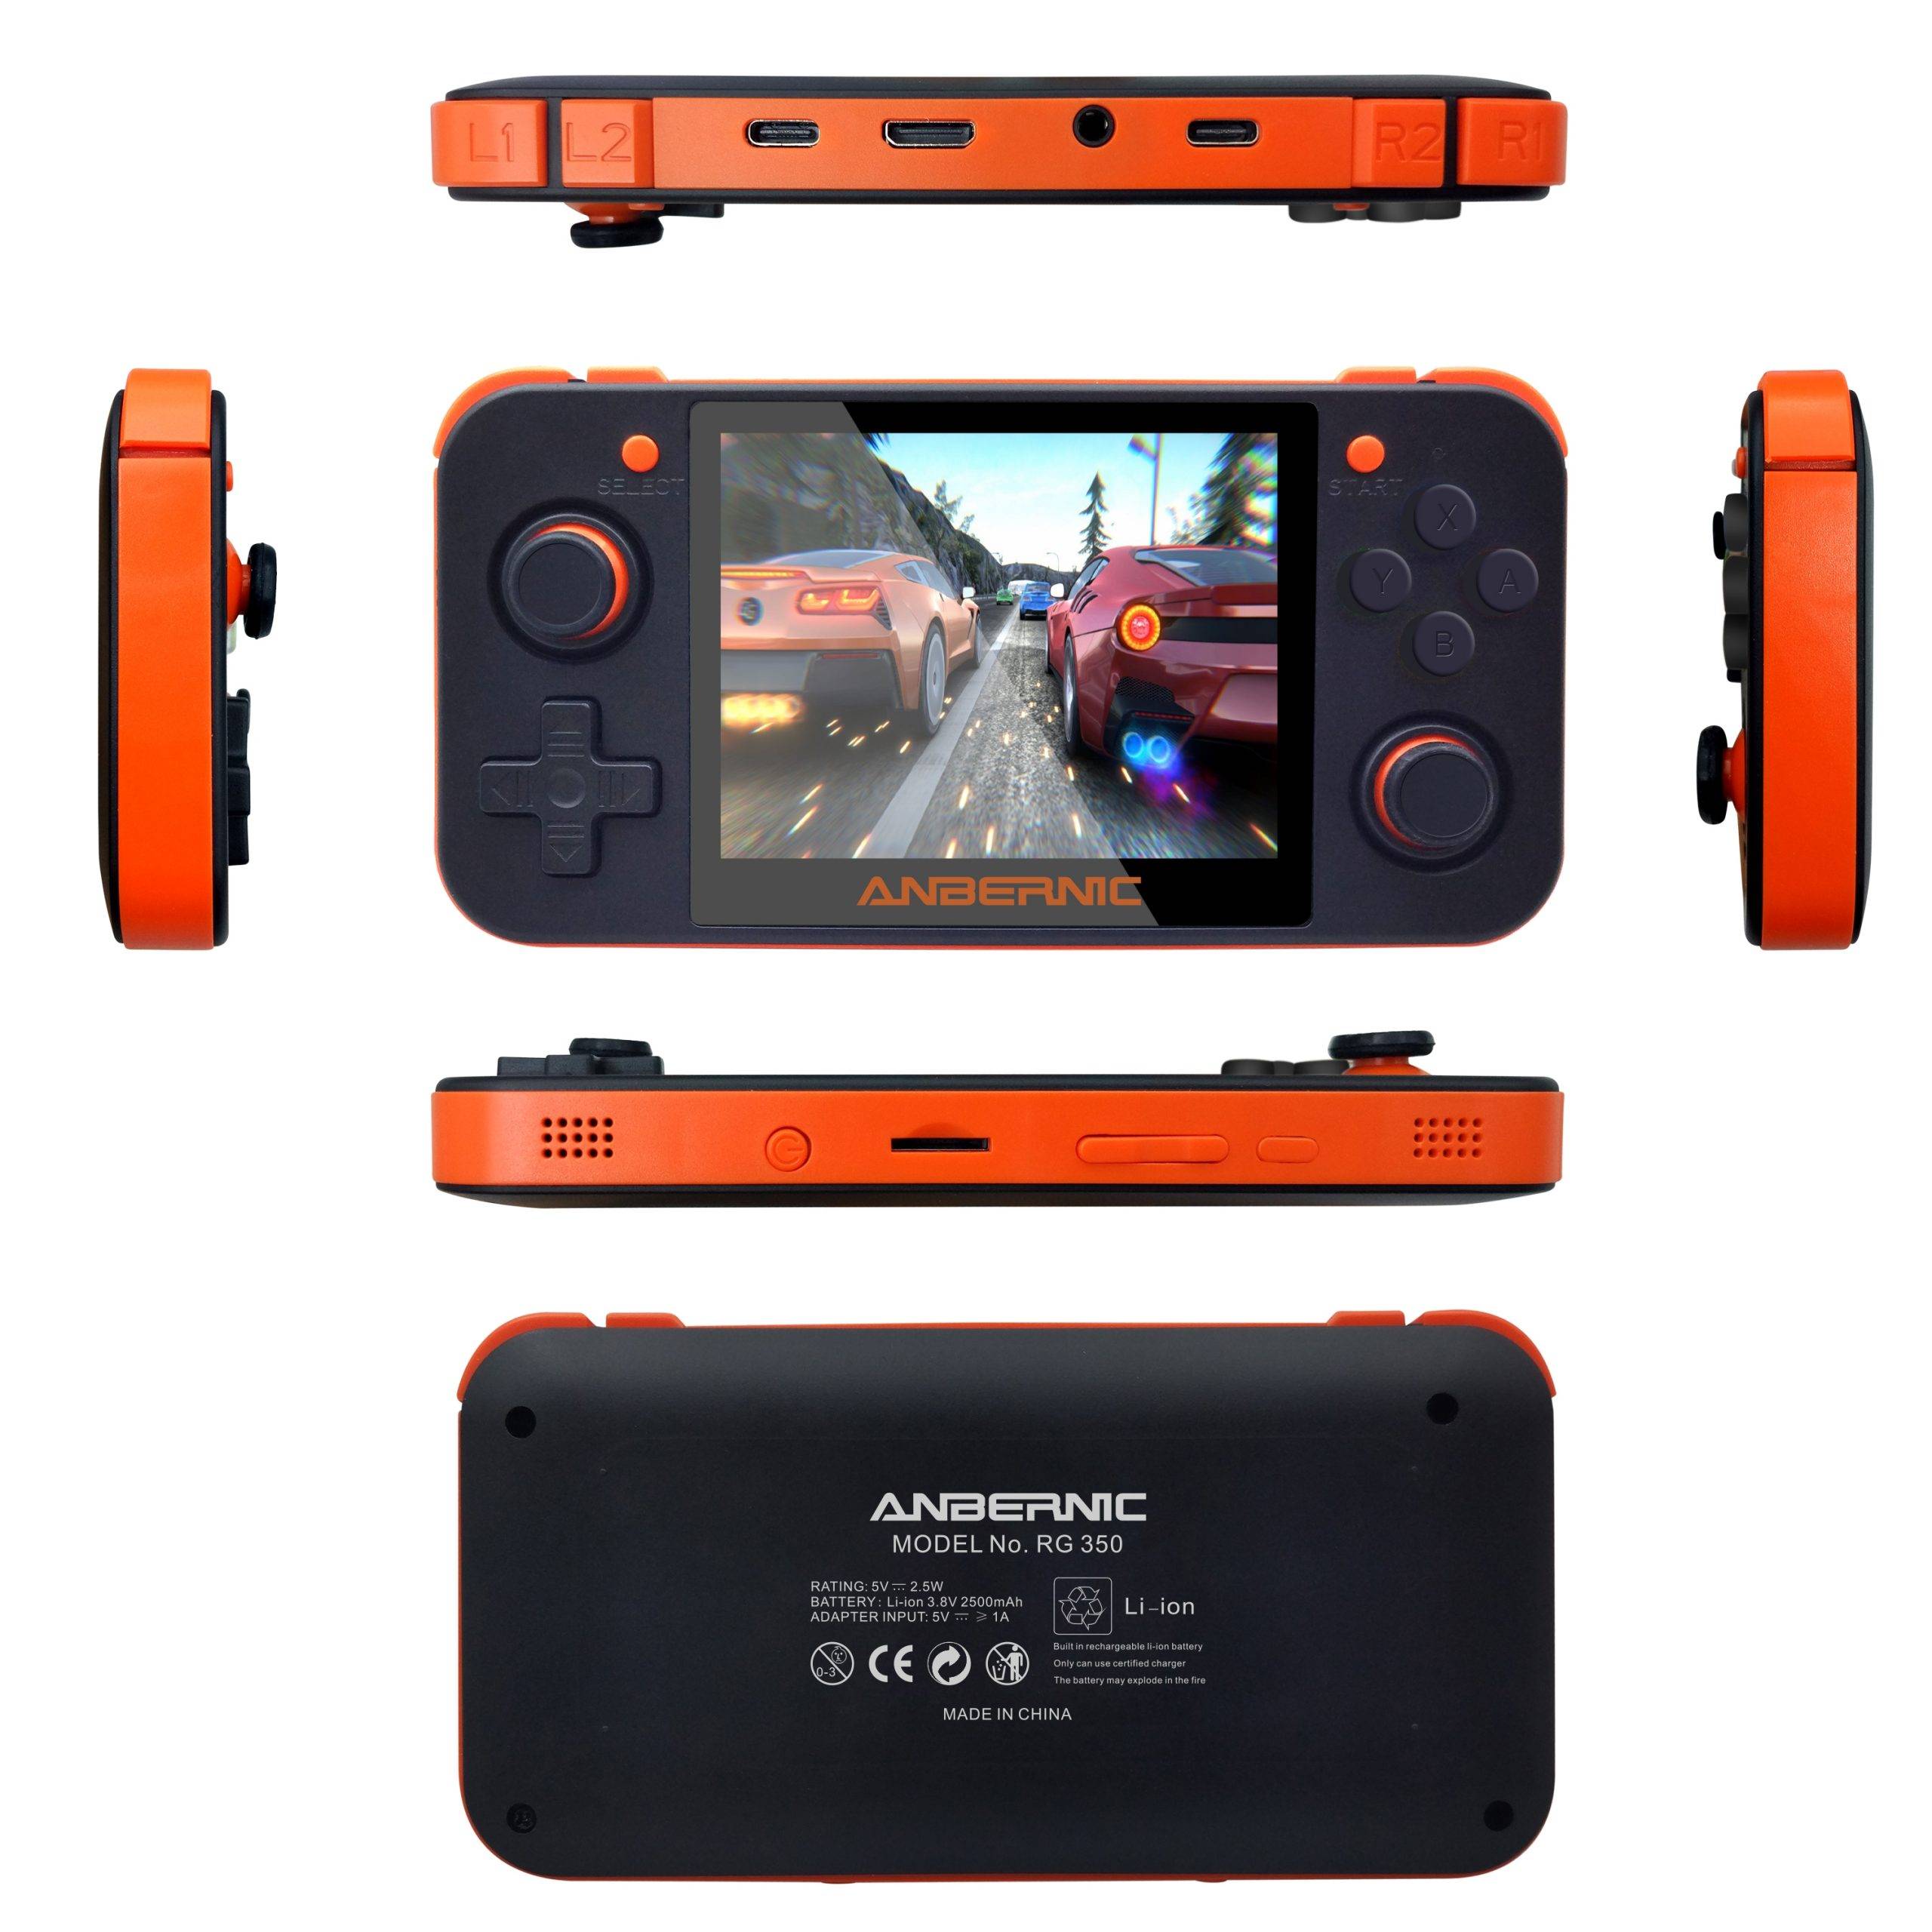 RG350 Handheld Game Console by Anbernic